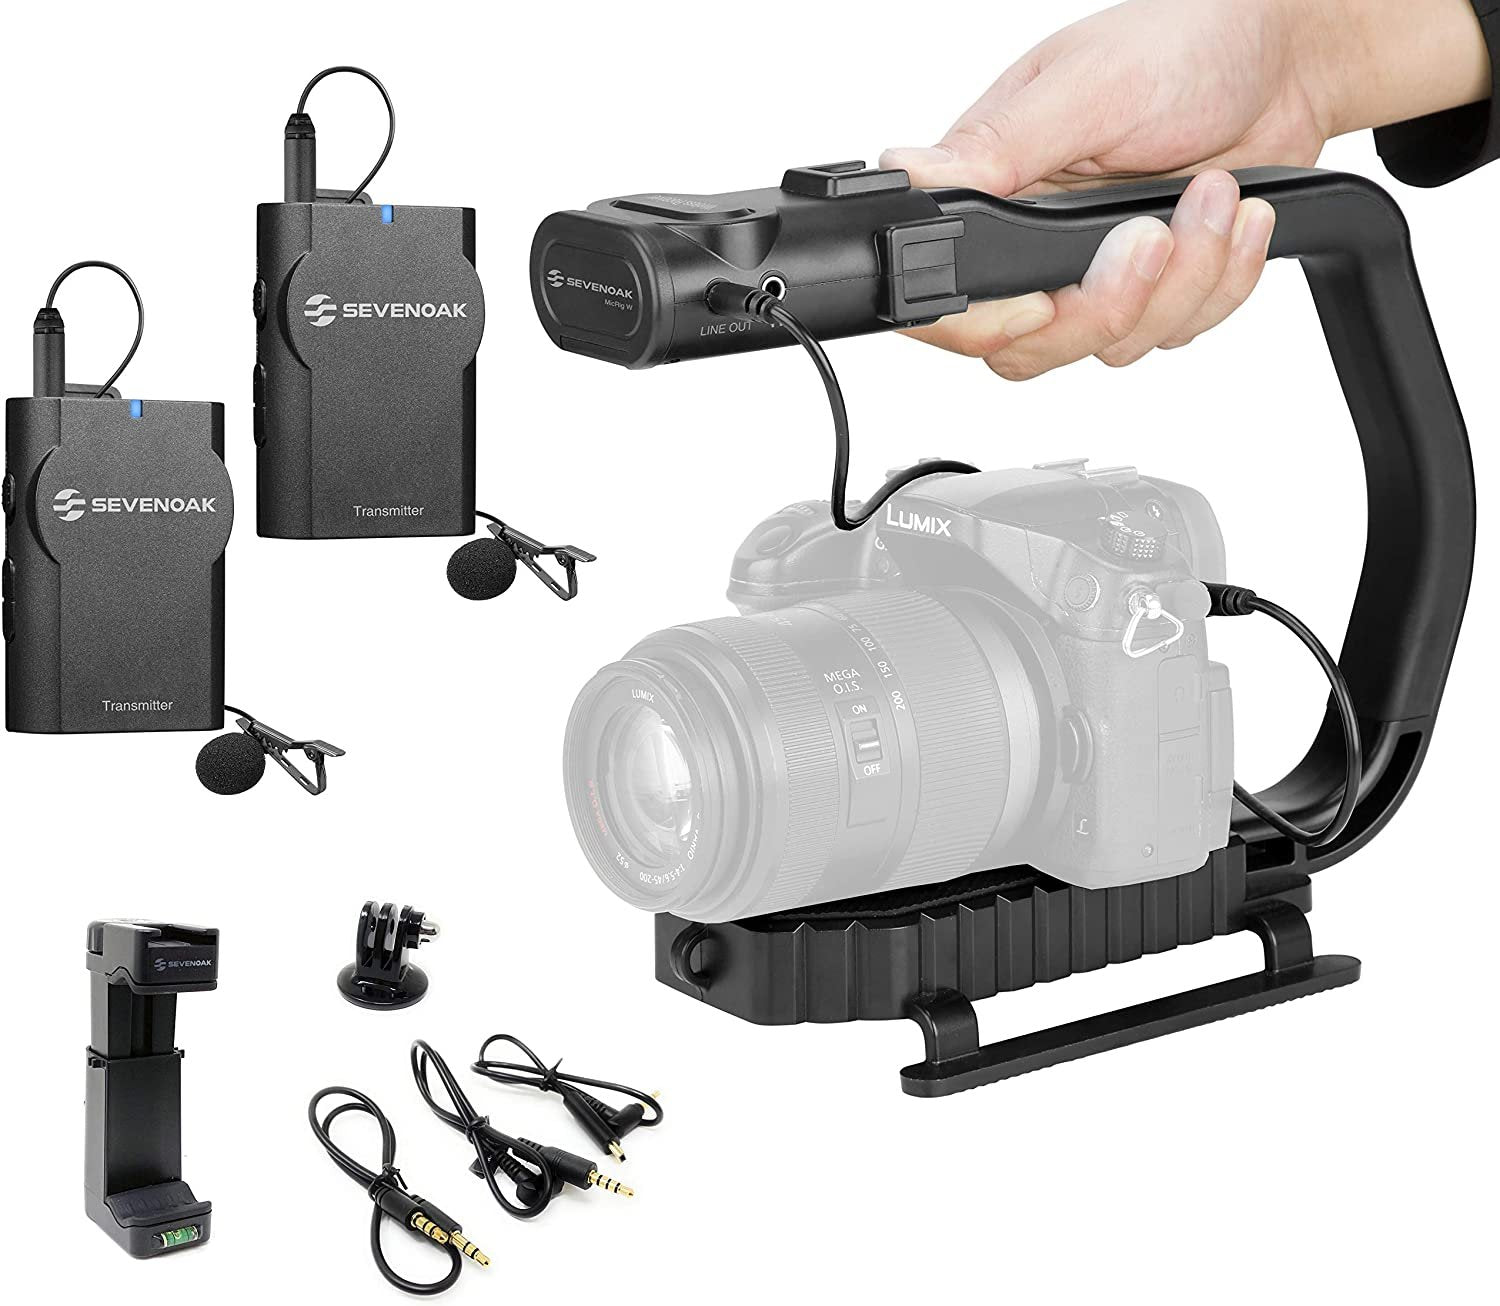 Movo MicRig-W2 Wireless Microphone Filmmaker Kit - Video Handle Stabilizer with Built-in Dual Wireless Lavalier Microphone Compatible with Canon EOS, Nikon, Sony, Panasonic DSLR and Mirrorless Cameras